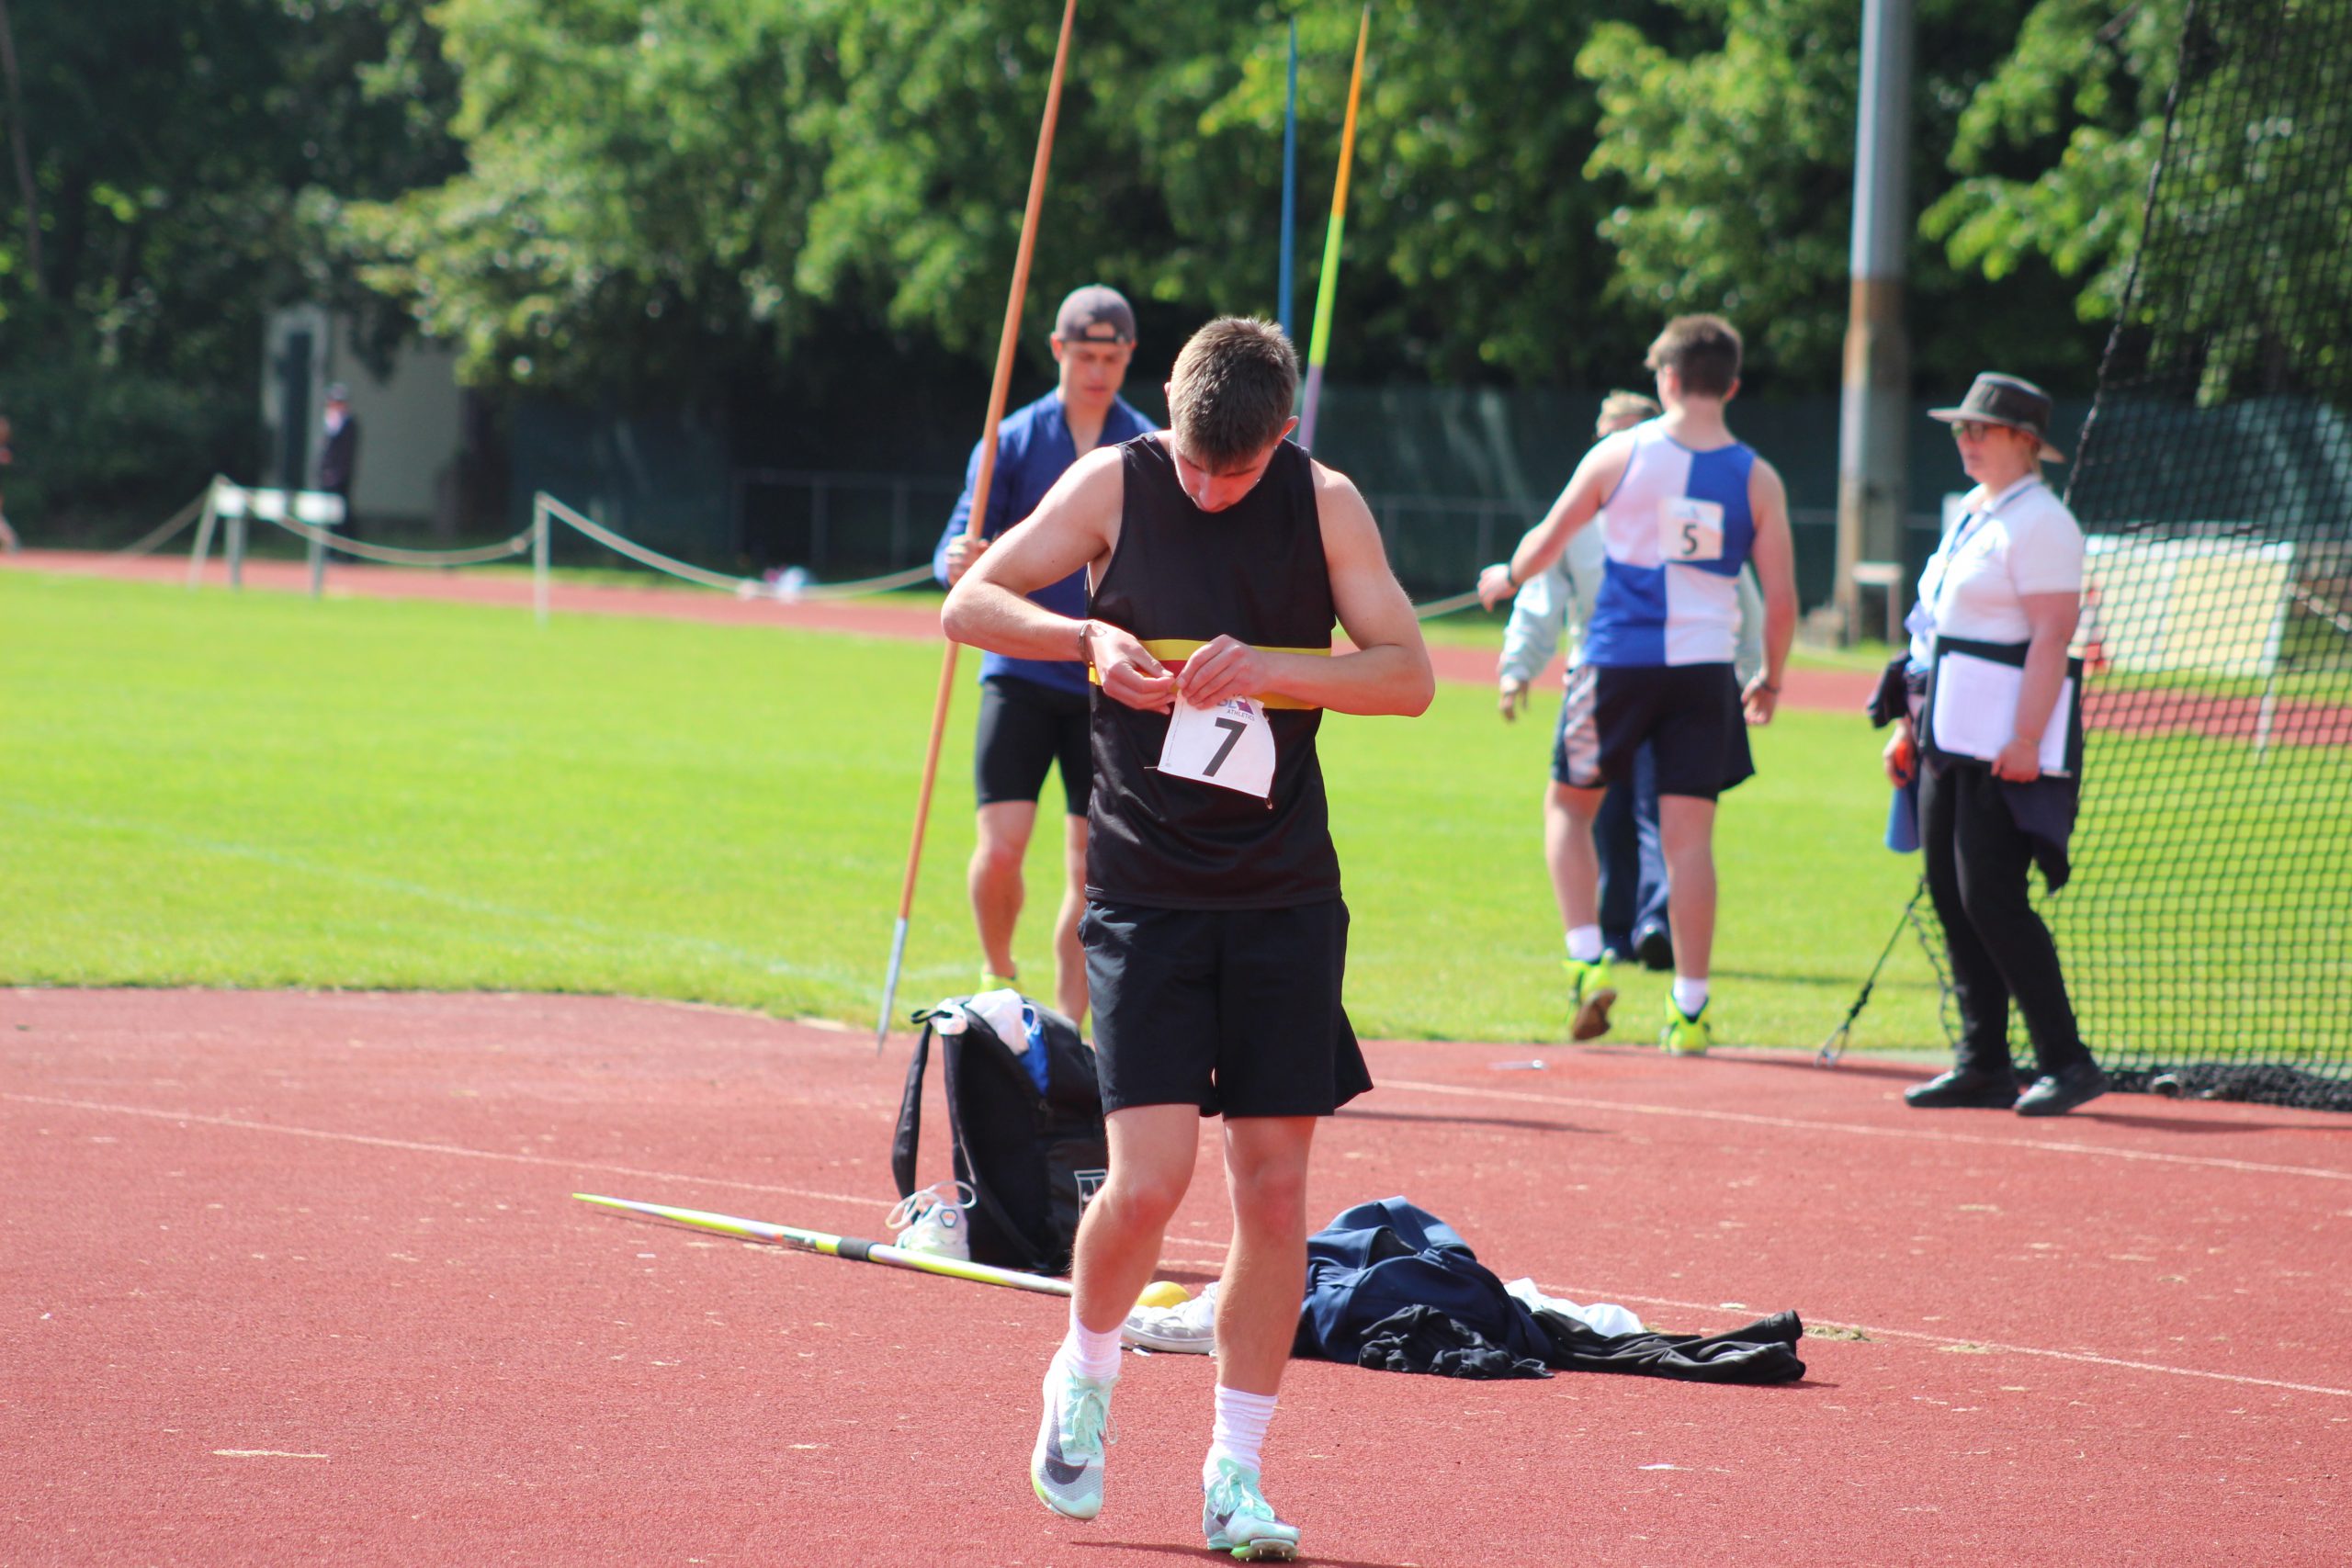 Man pining a number 7 on a black vest while on an athletics track